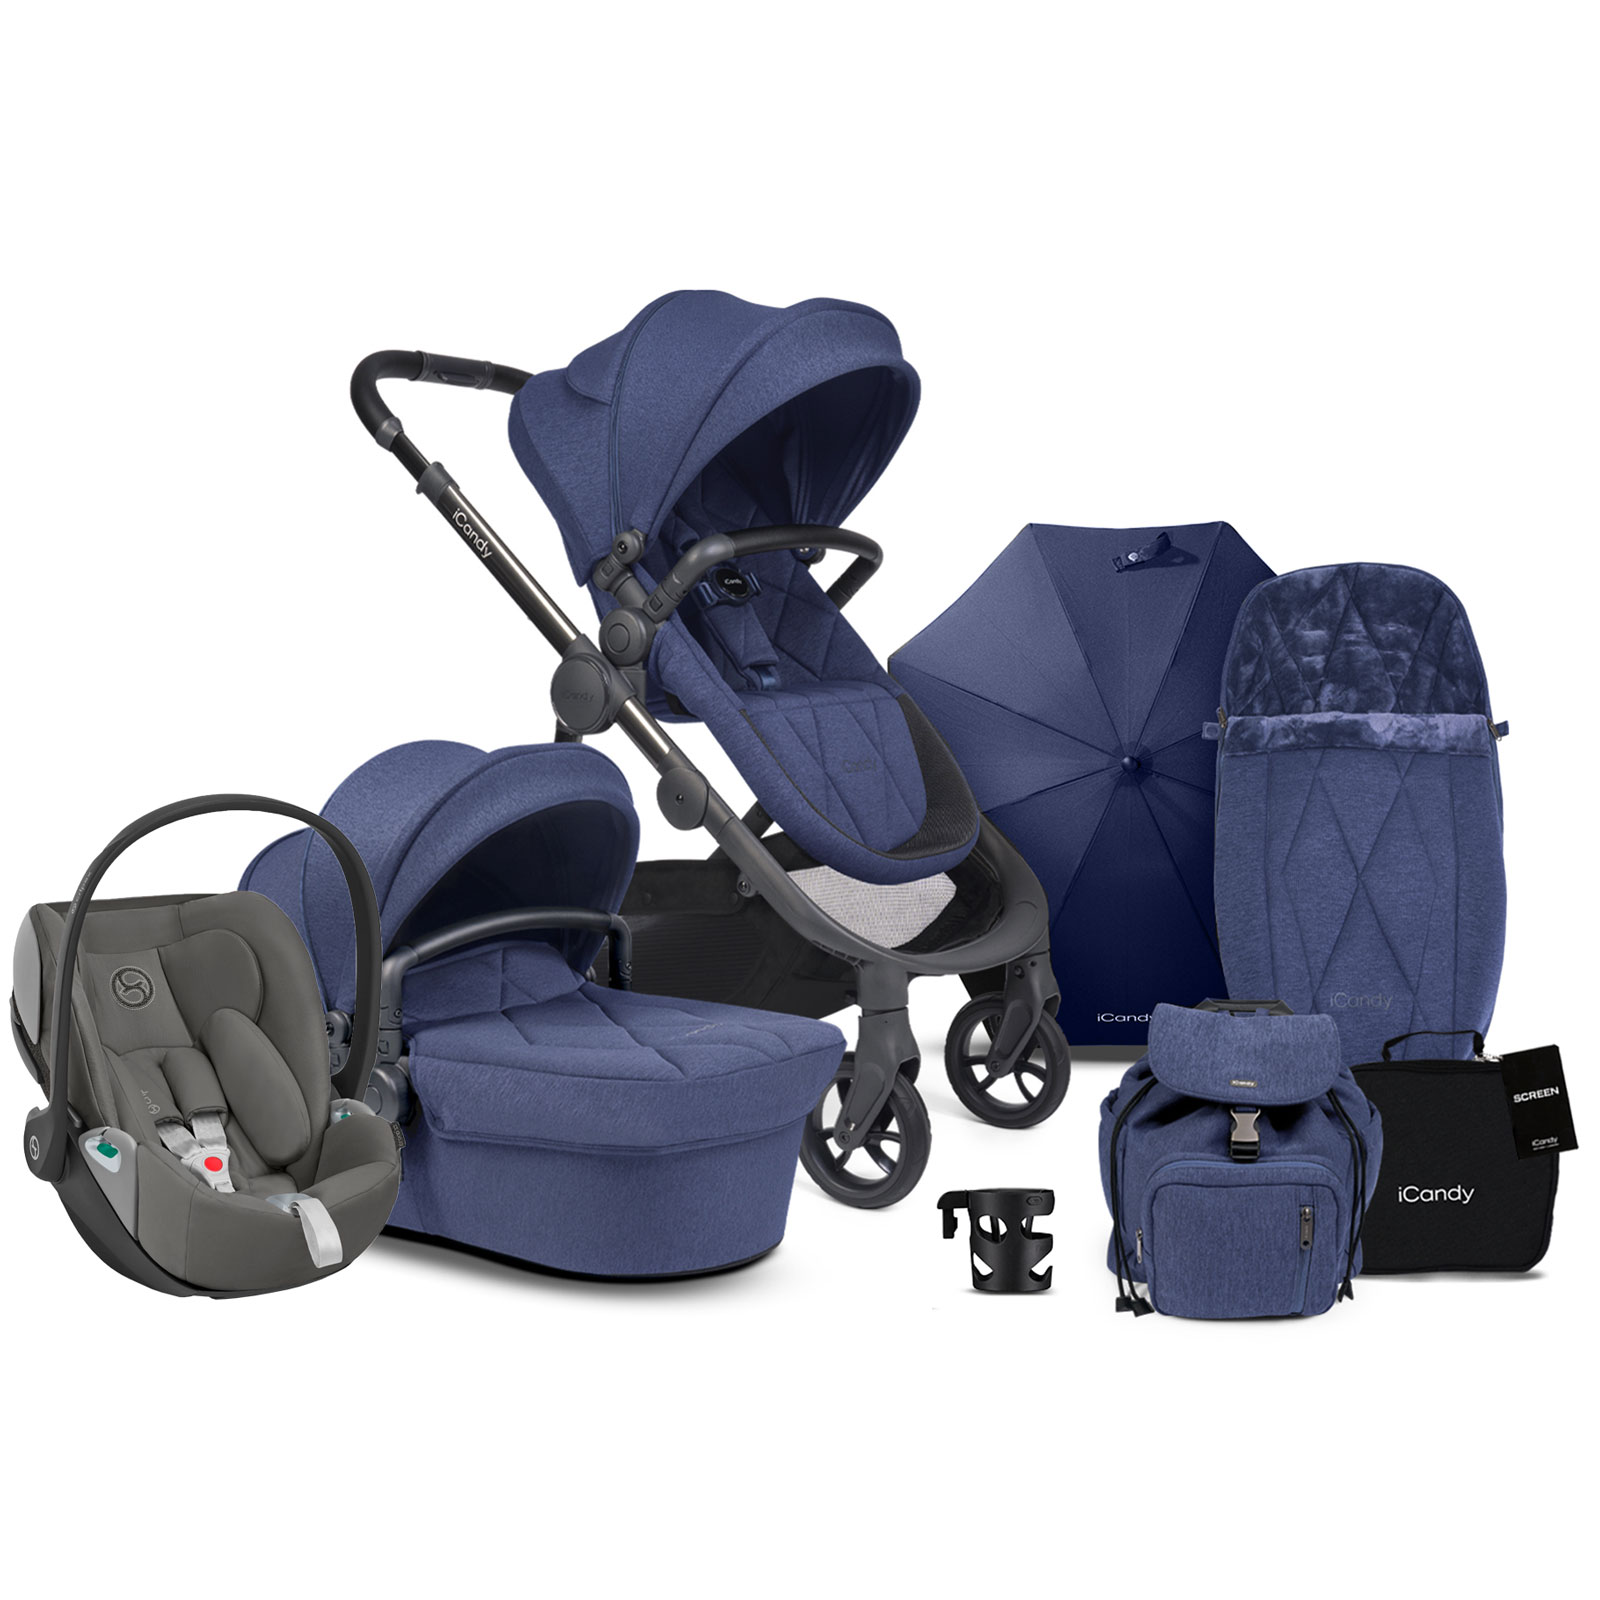 iCandy Orange Complete Travel System With Cybex Cloud Z Car Seat – Royal Blue